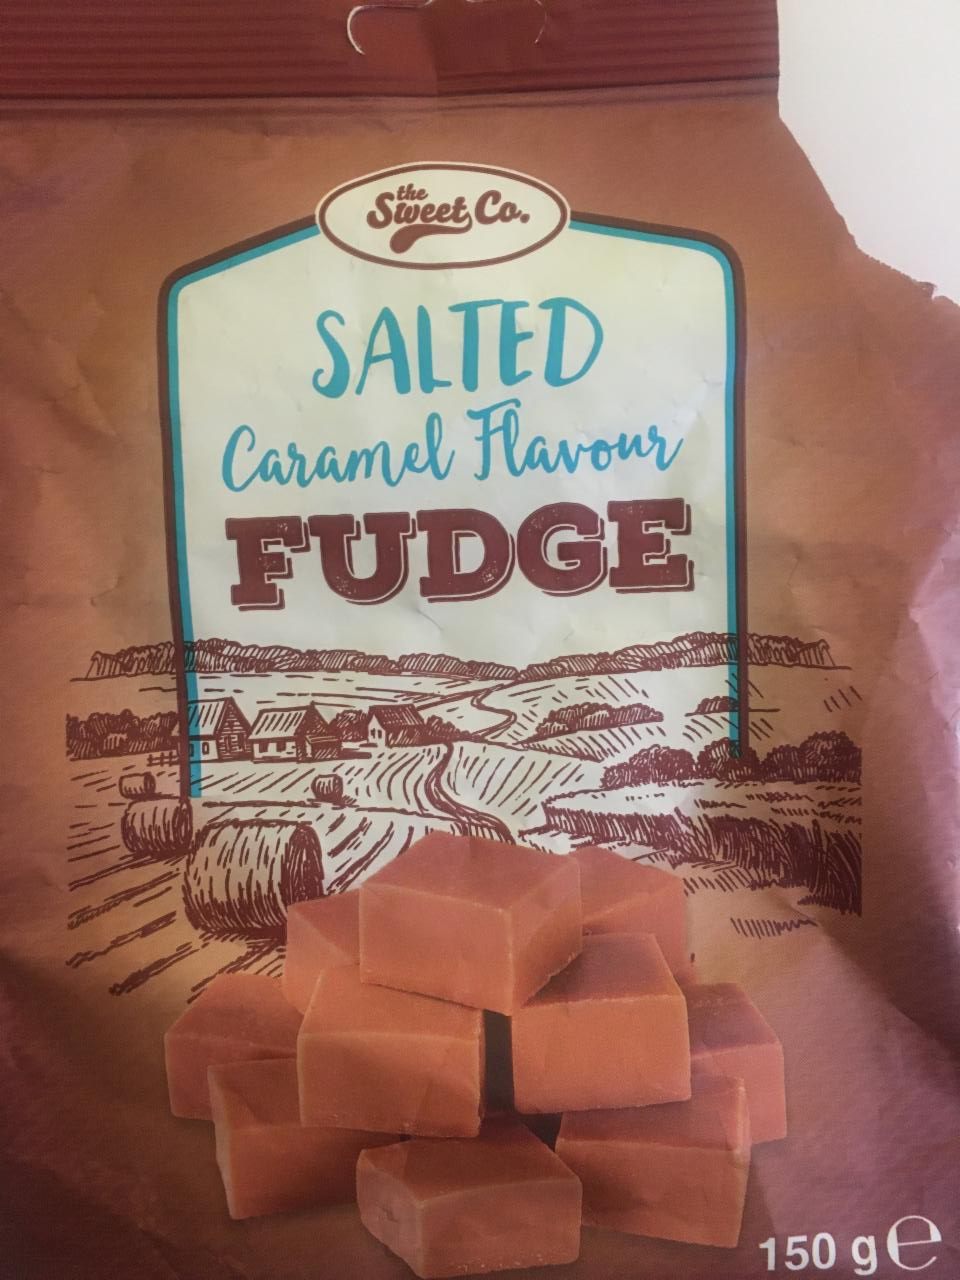 Fotografie - Salted Caramel Flavour Fudge The Sweet Co.